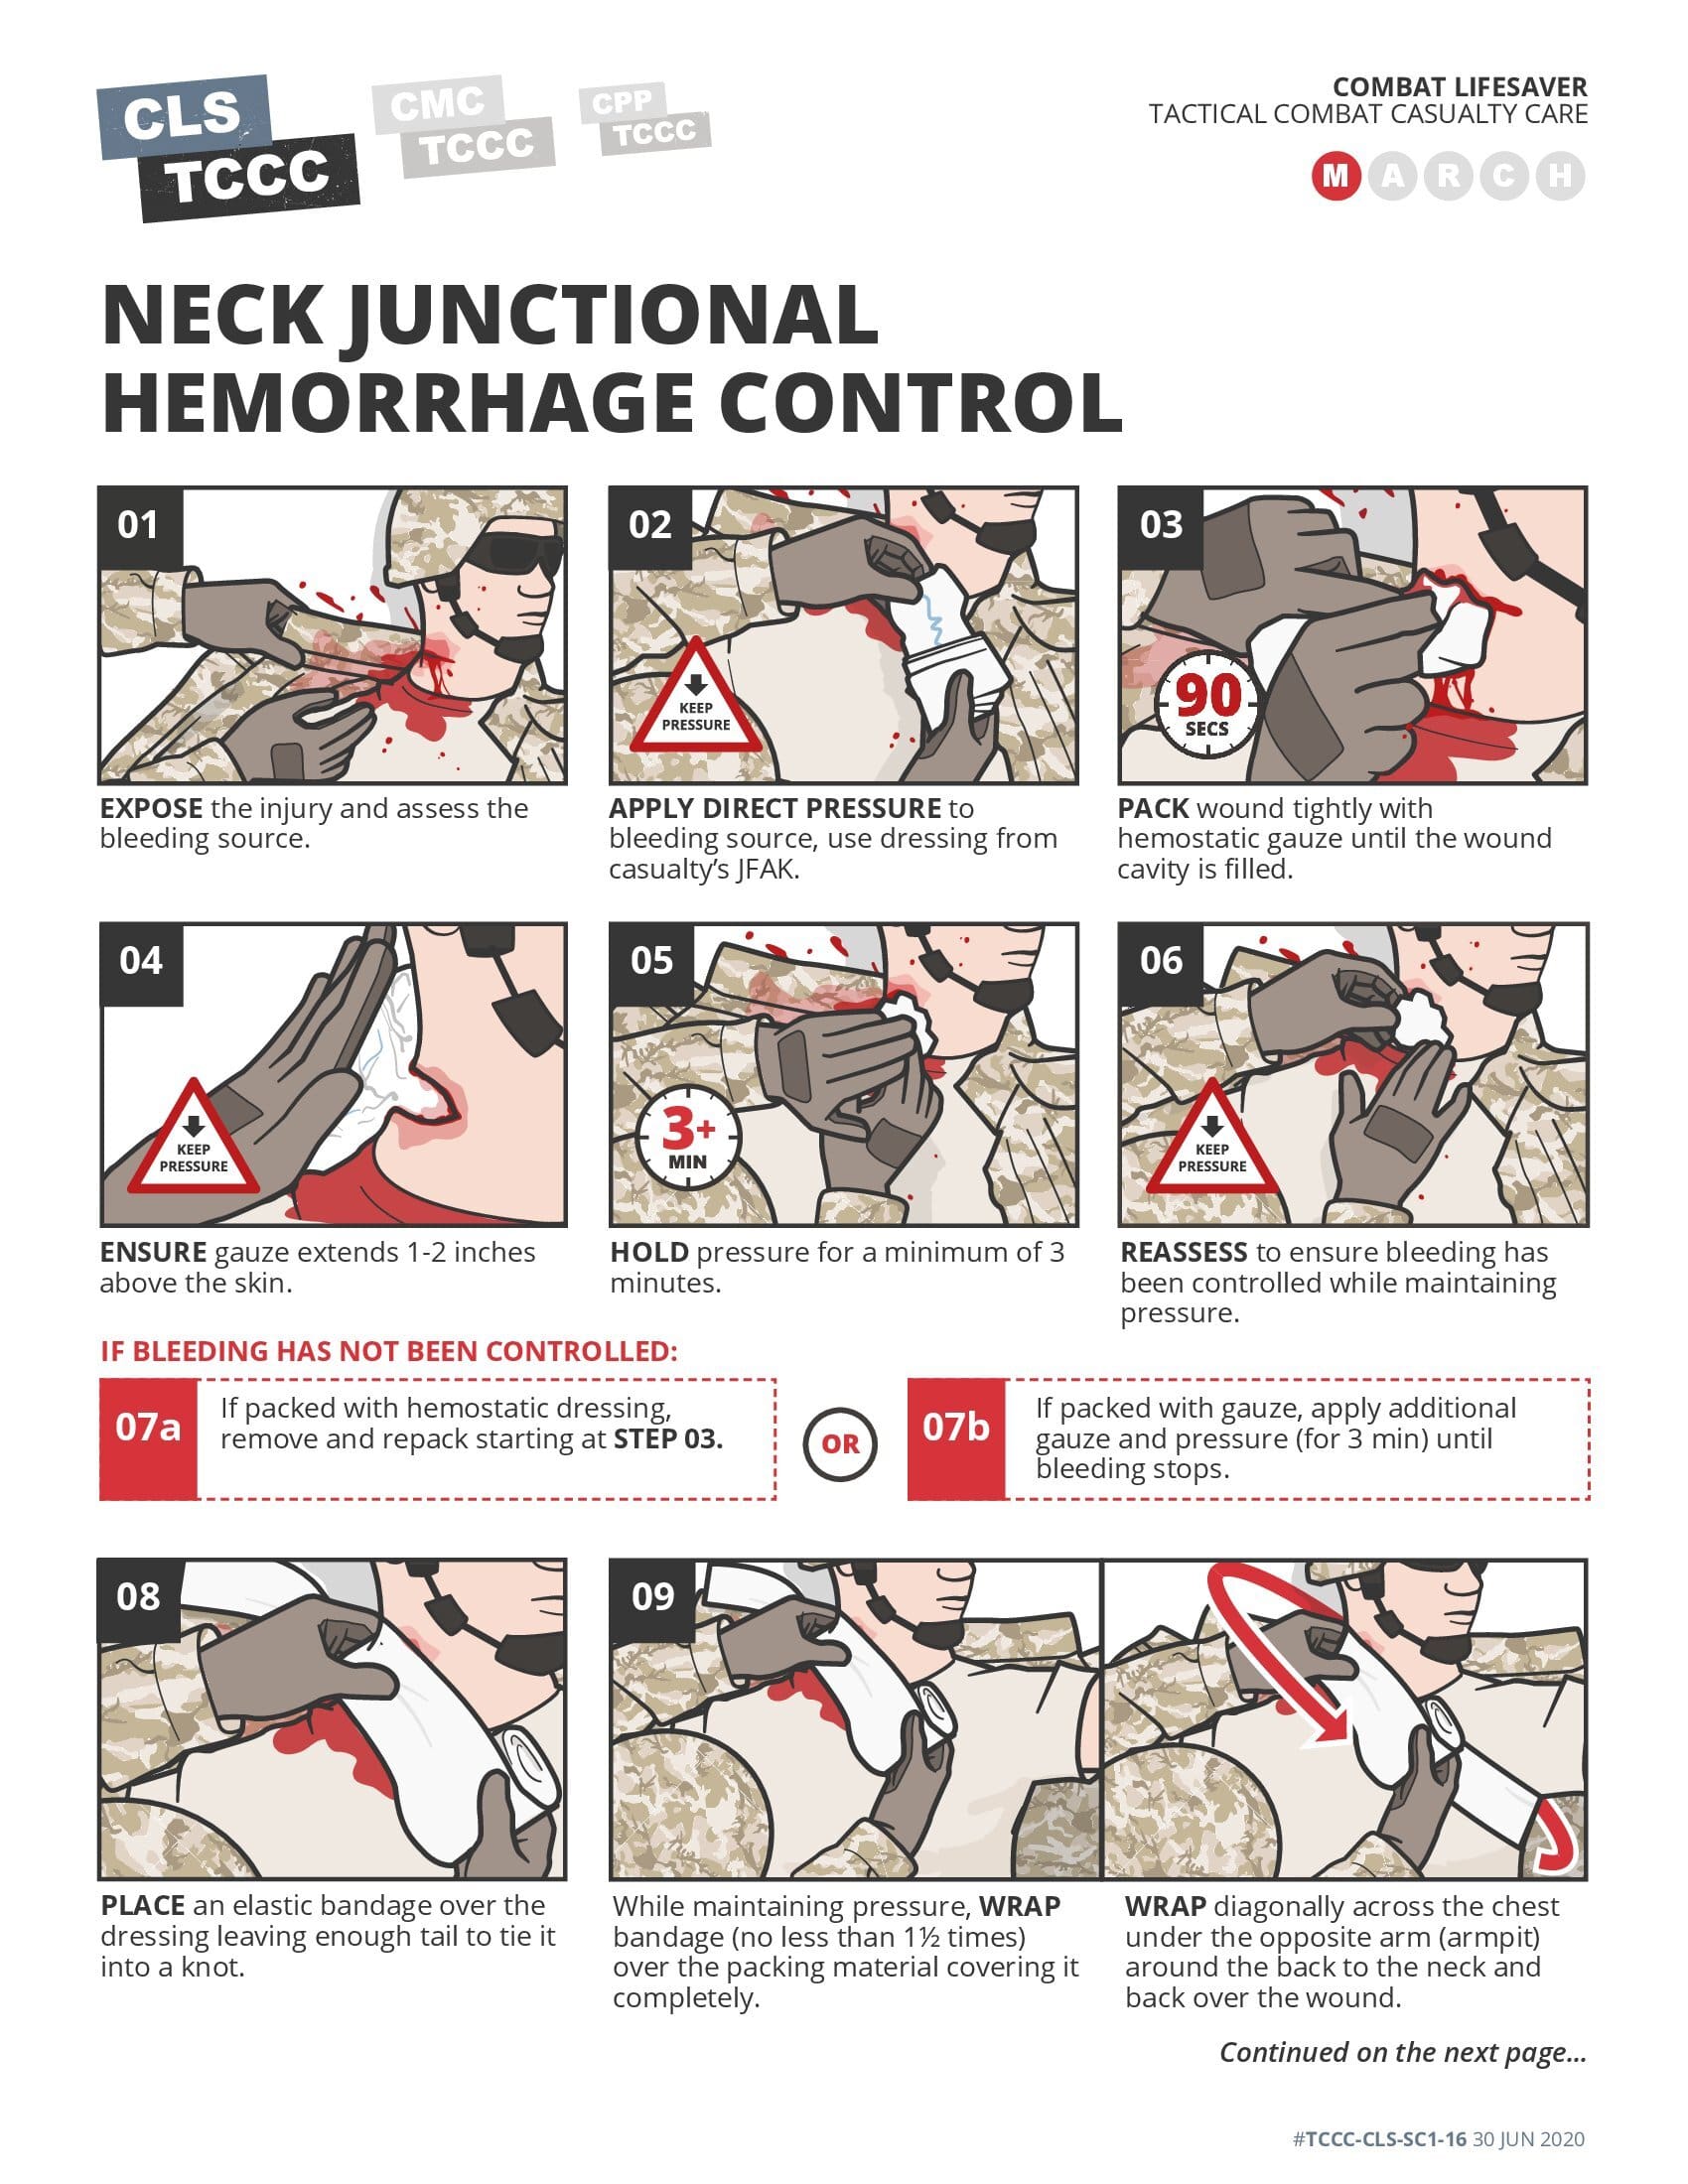 Neck Junctional Hemorrhage Control, page 1